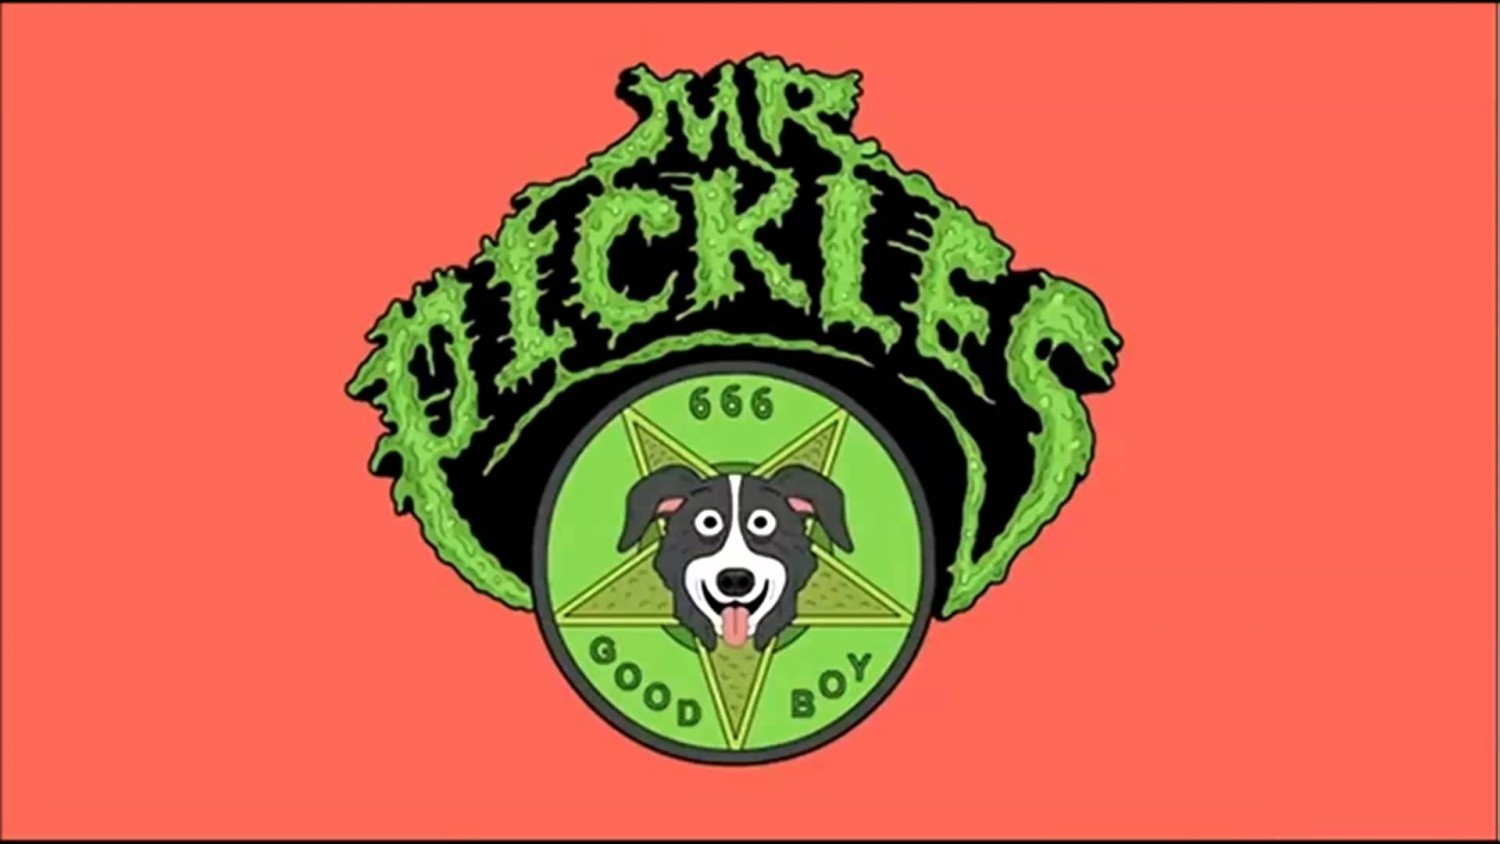 Mr Pickles Tattoo - Home - wide 10